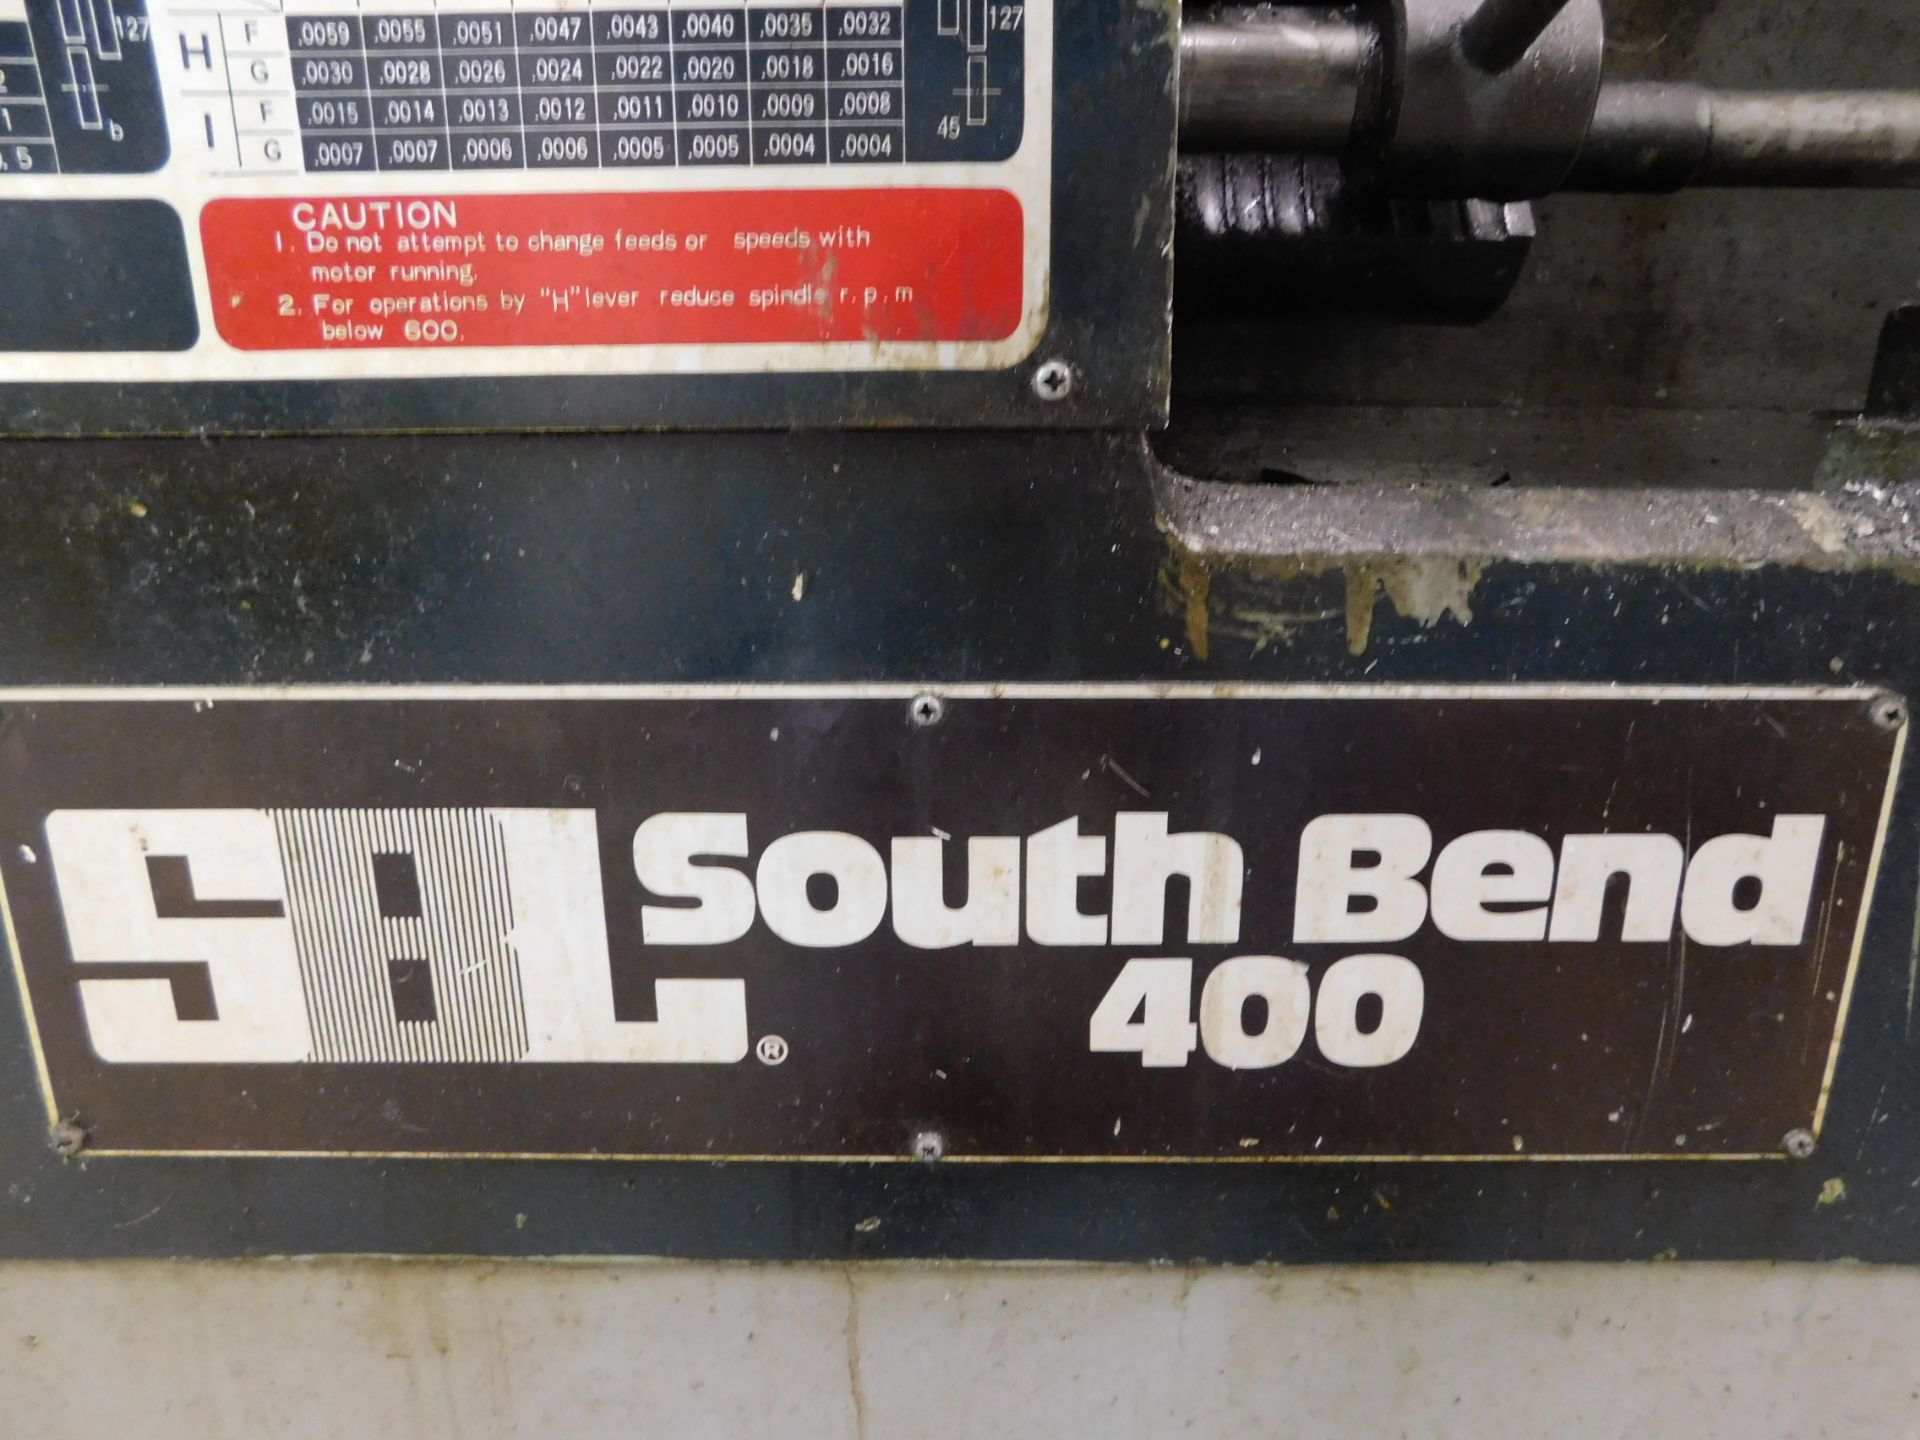 South Bend 400 16" x 36" Toolroom Lathe, SN 020230, with Anilam Wizard 411 2-Axis Digital Readout - Image 14 of 15